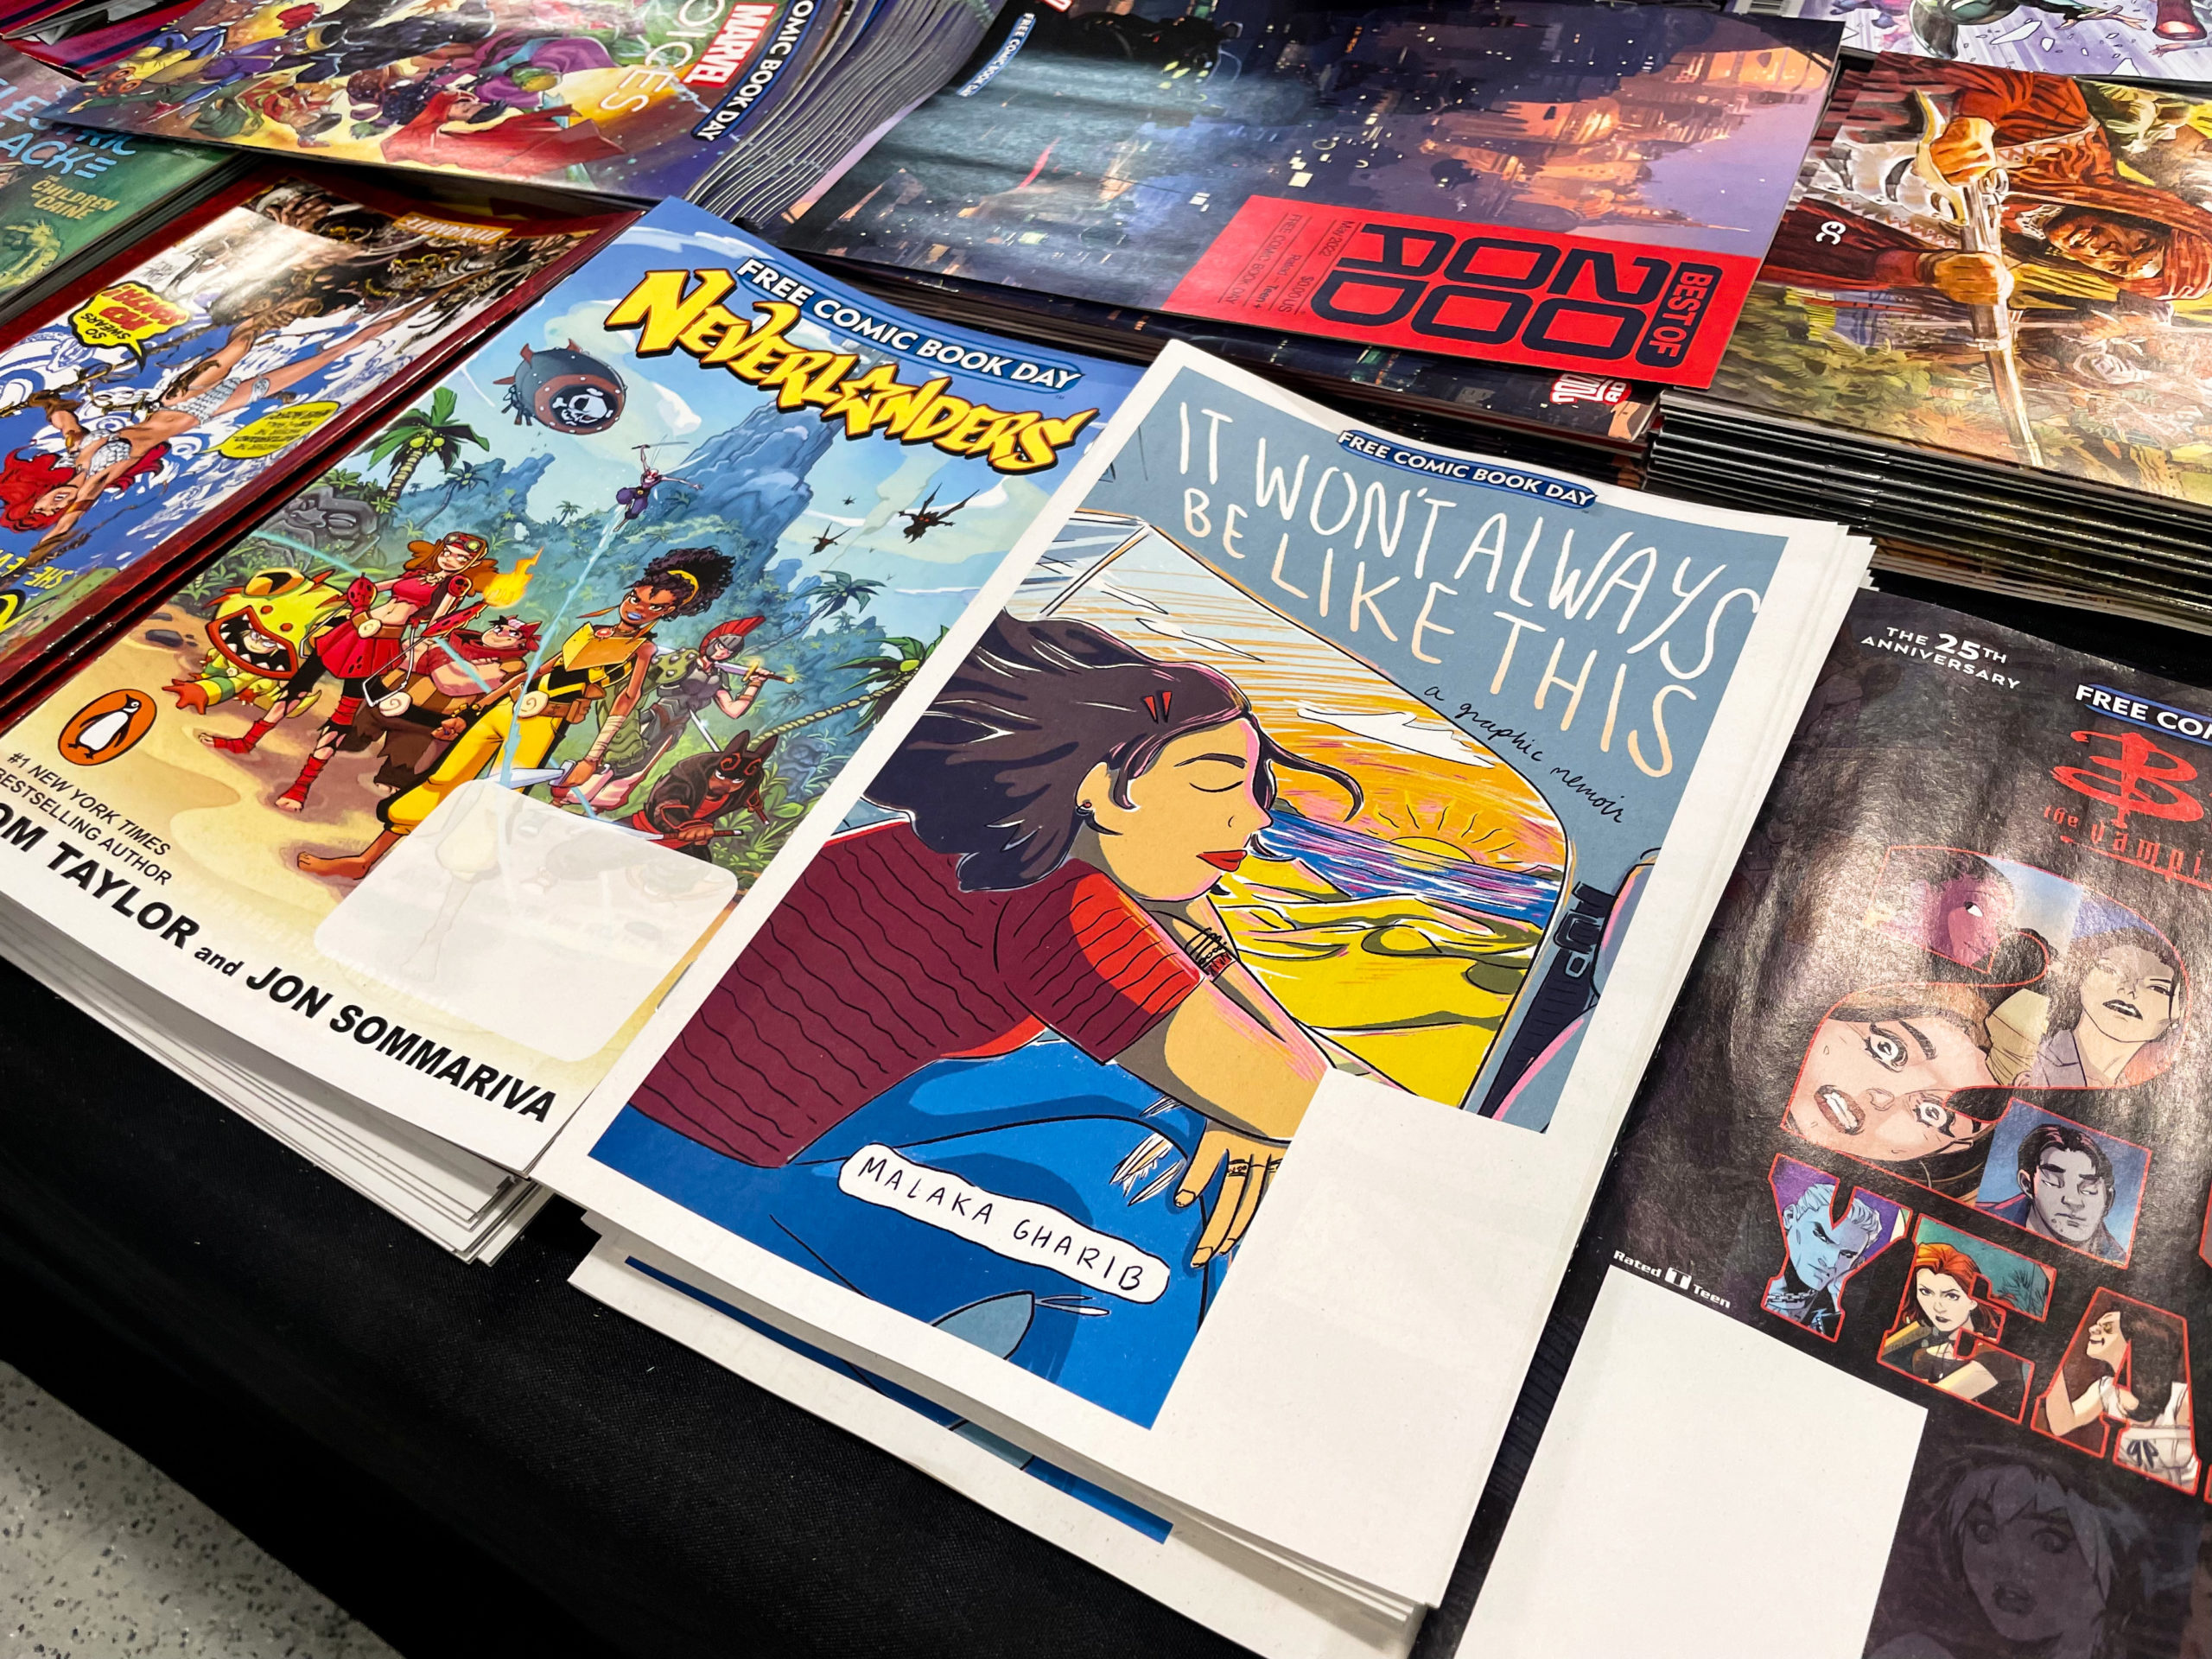 The art of storytelling through comics and graphic novels